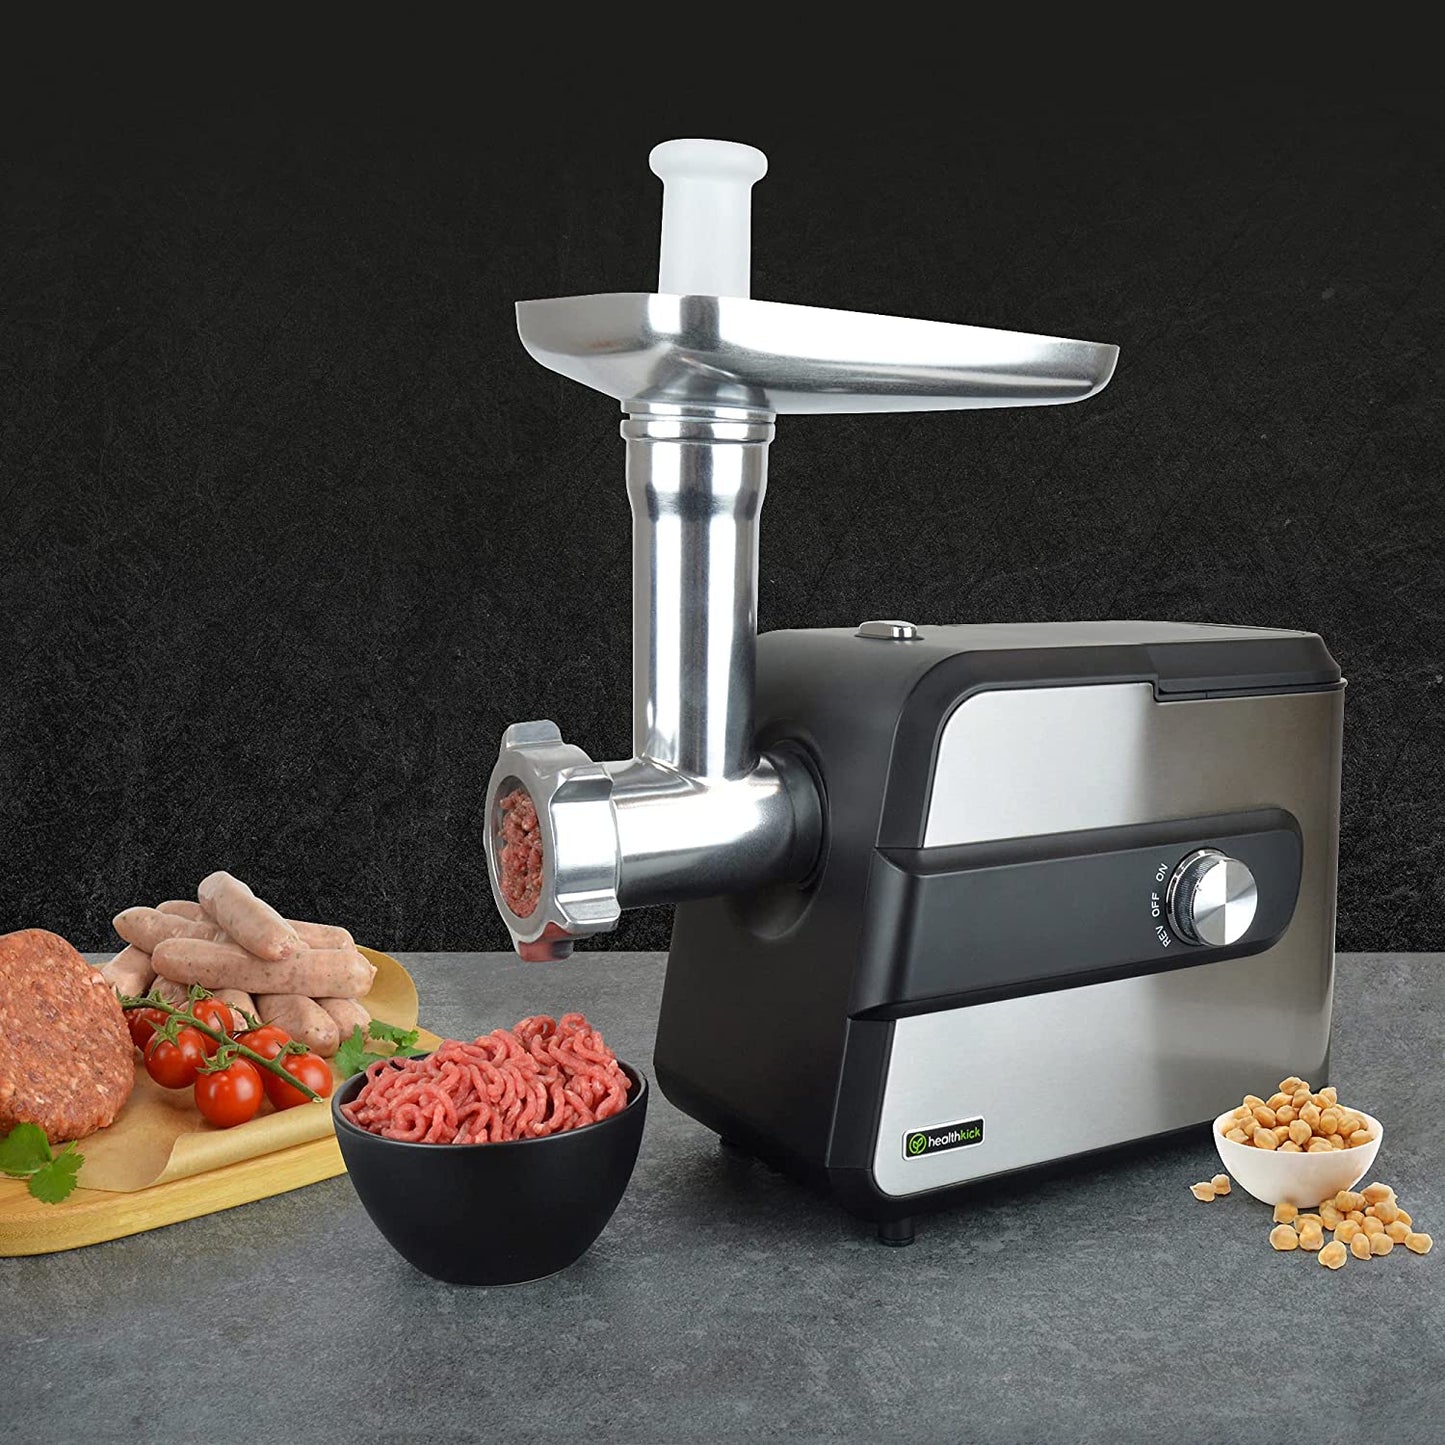 Powerful Healthkick Electric Black and Stainless Steel Food and Meat Grinder (K3321)